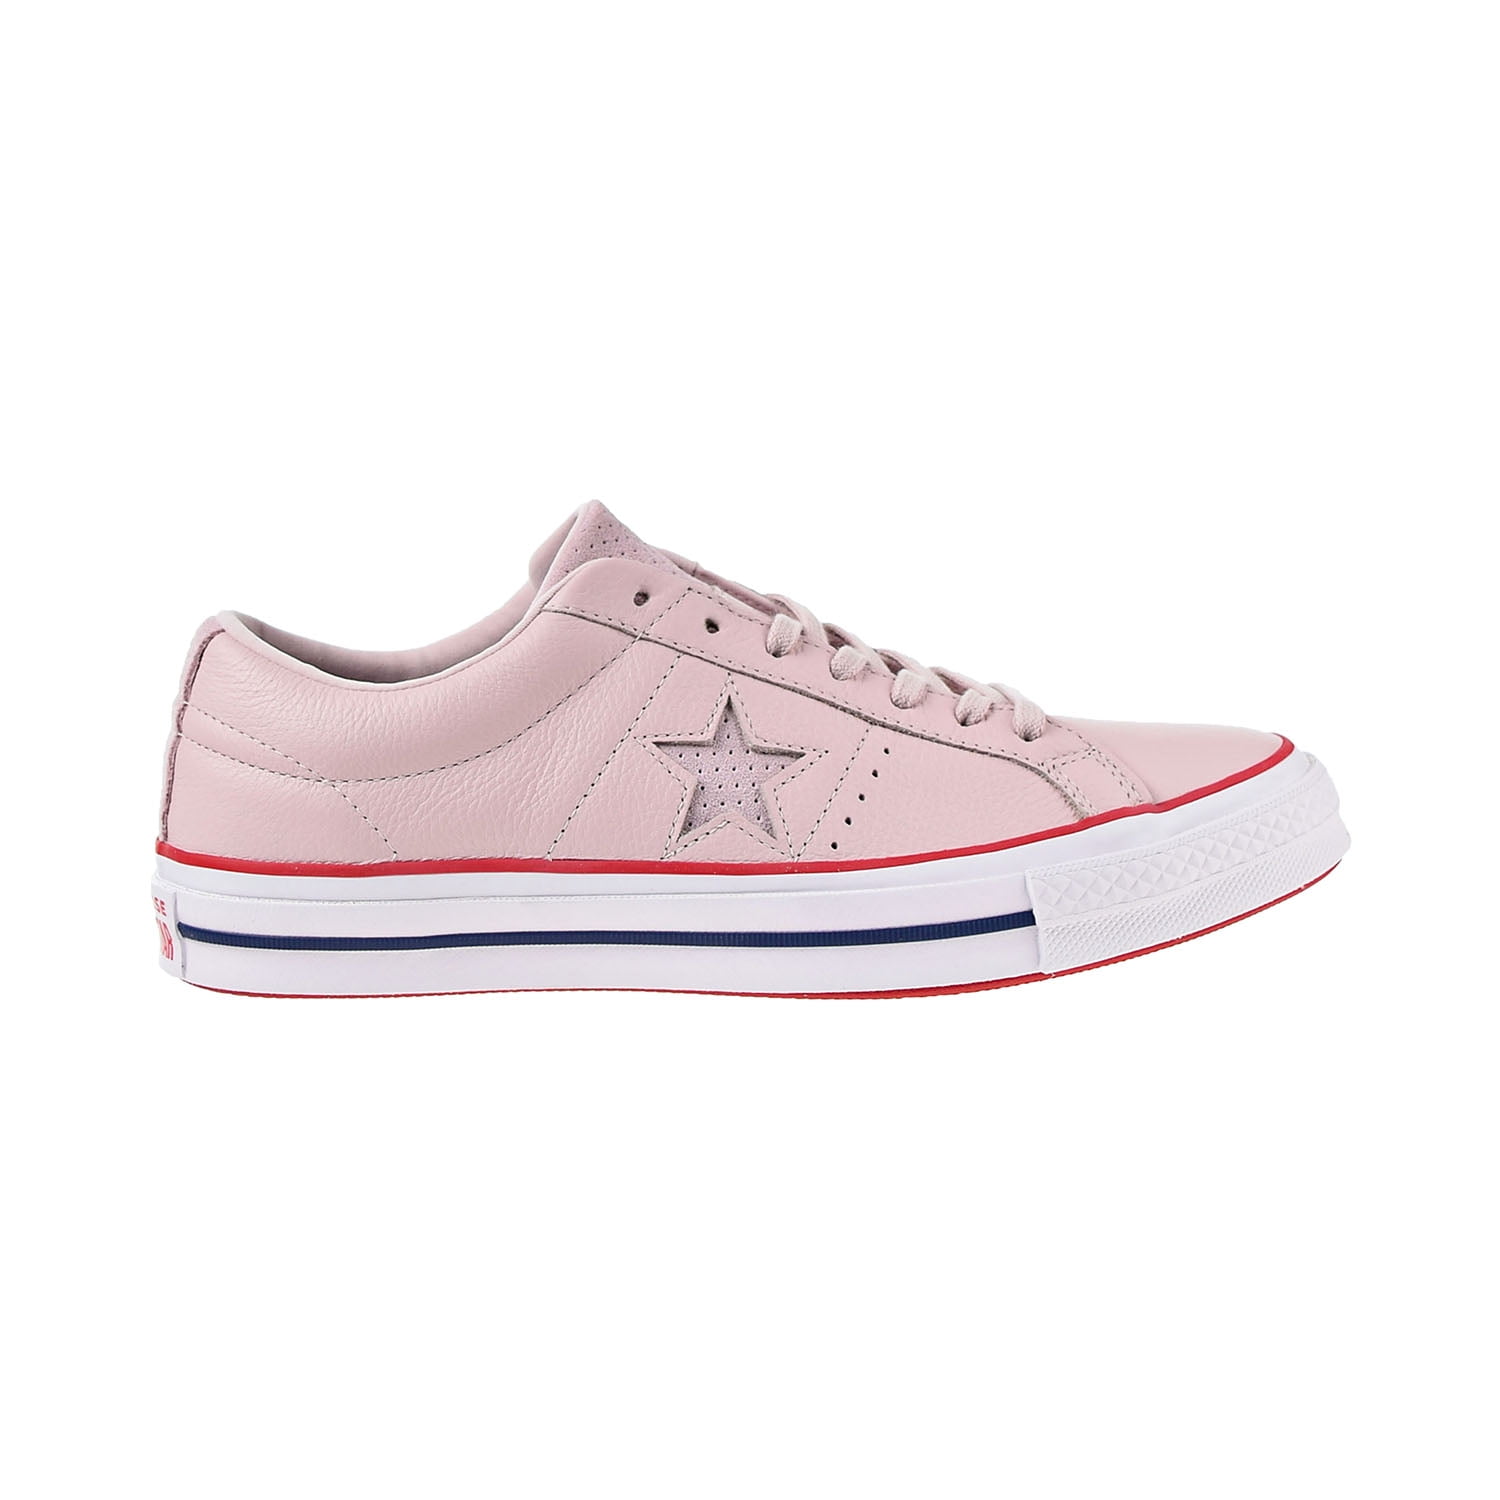 Converse One Star Ox Men's Shoes 